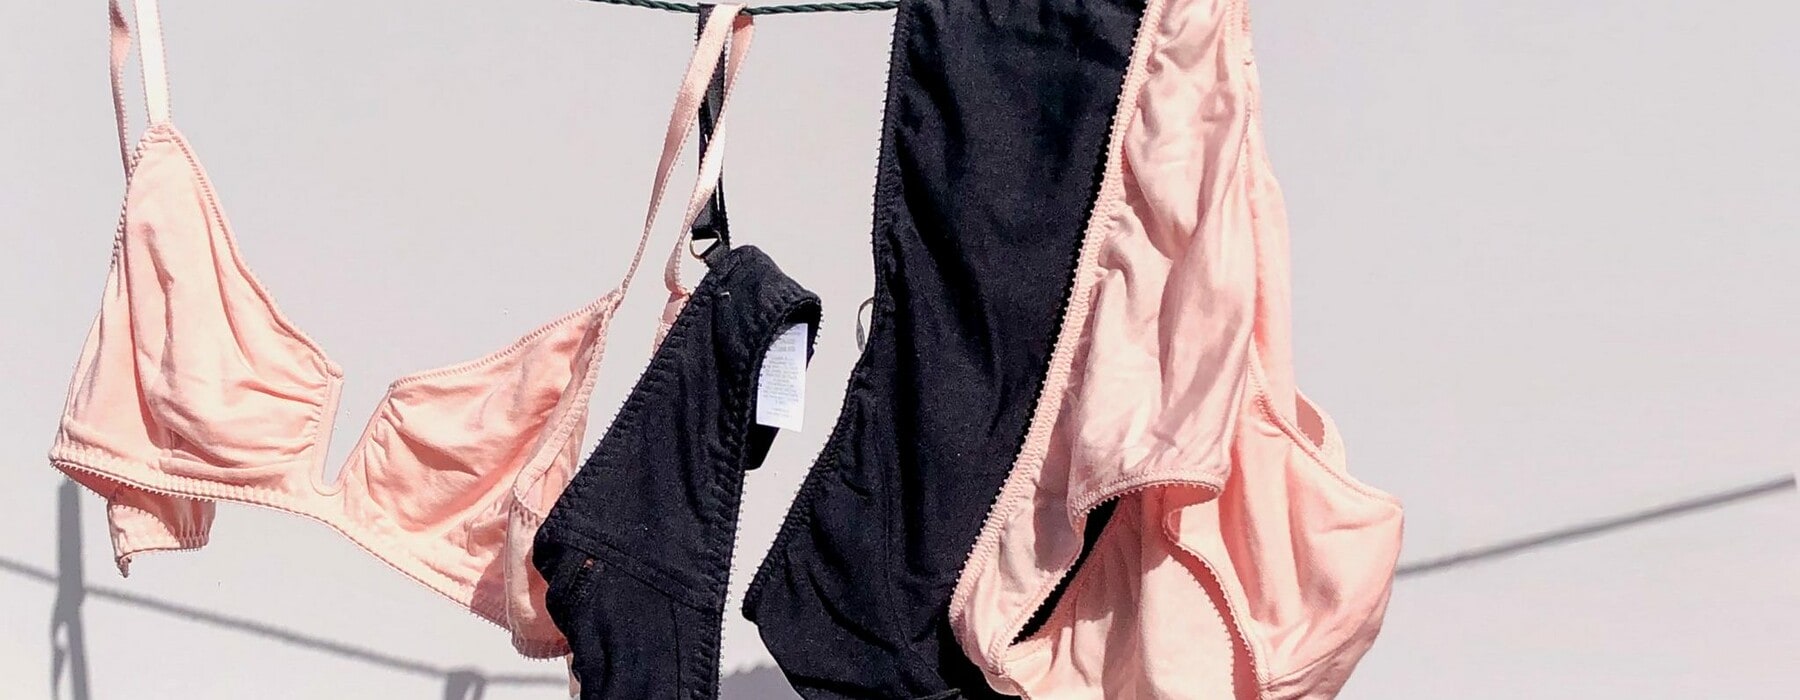 Everything You Need To Know About Ethical And Sustainable Underwear - WOMAN